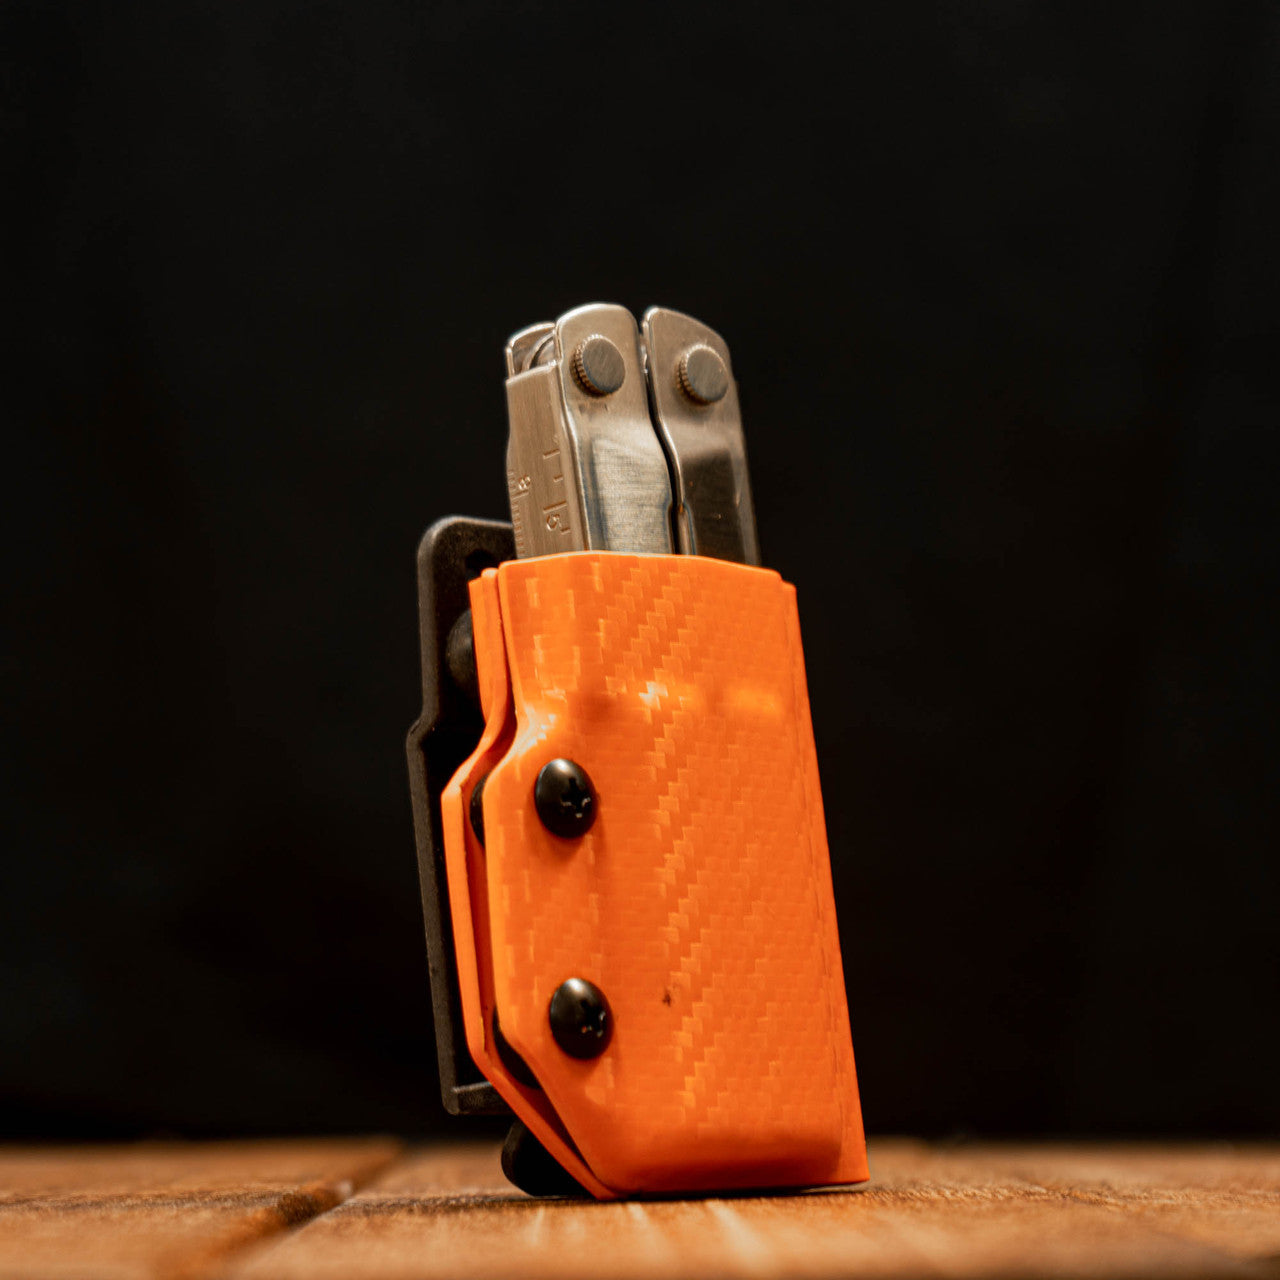 Kydex Sheath for the Leatherman Bond Clip & Carry